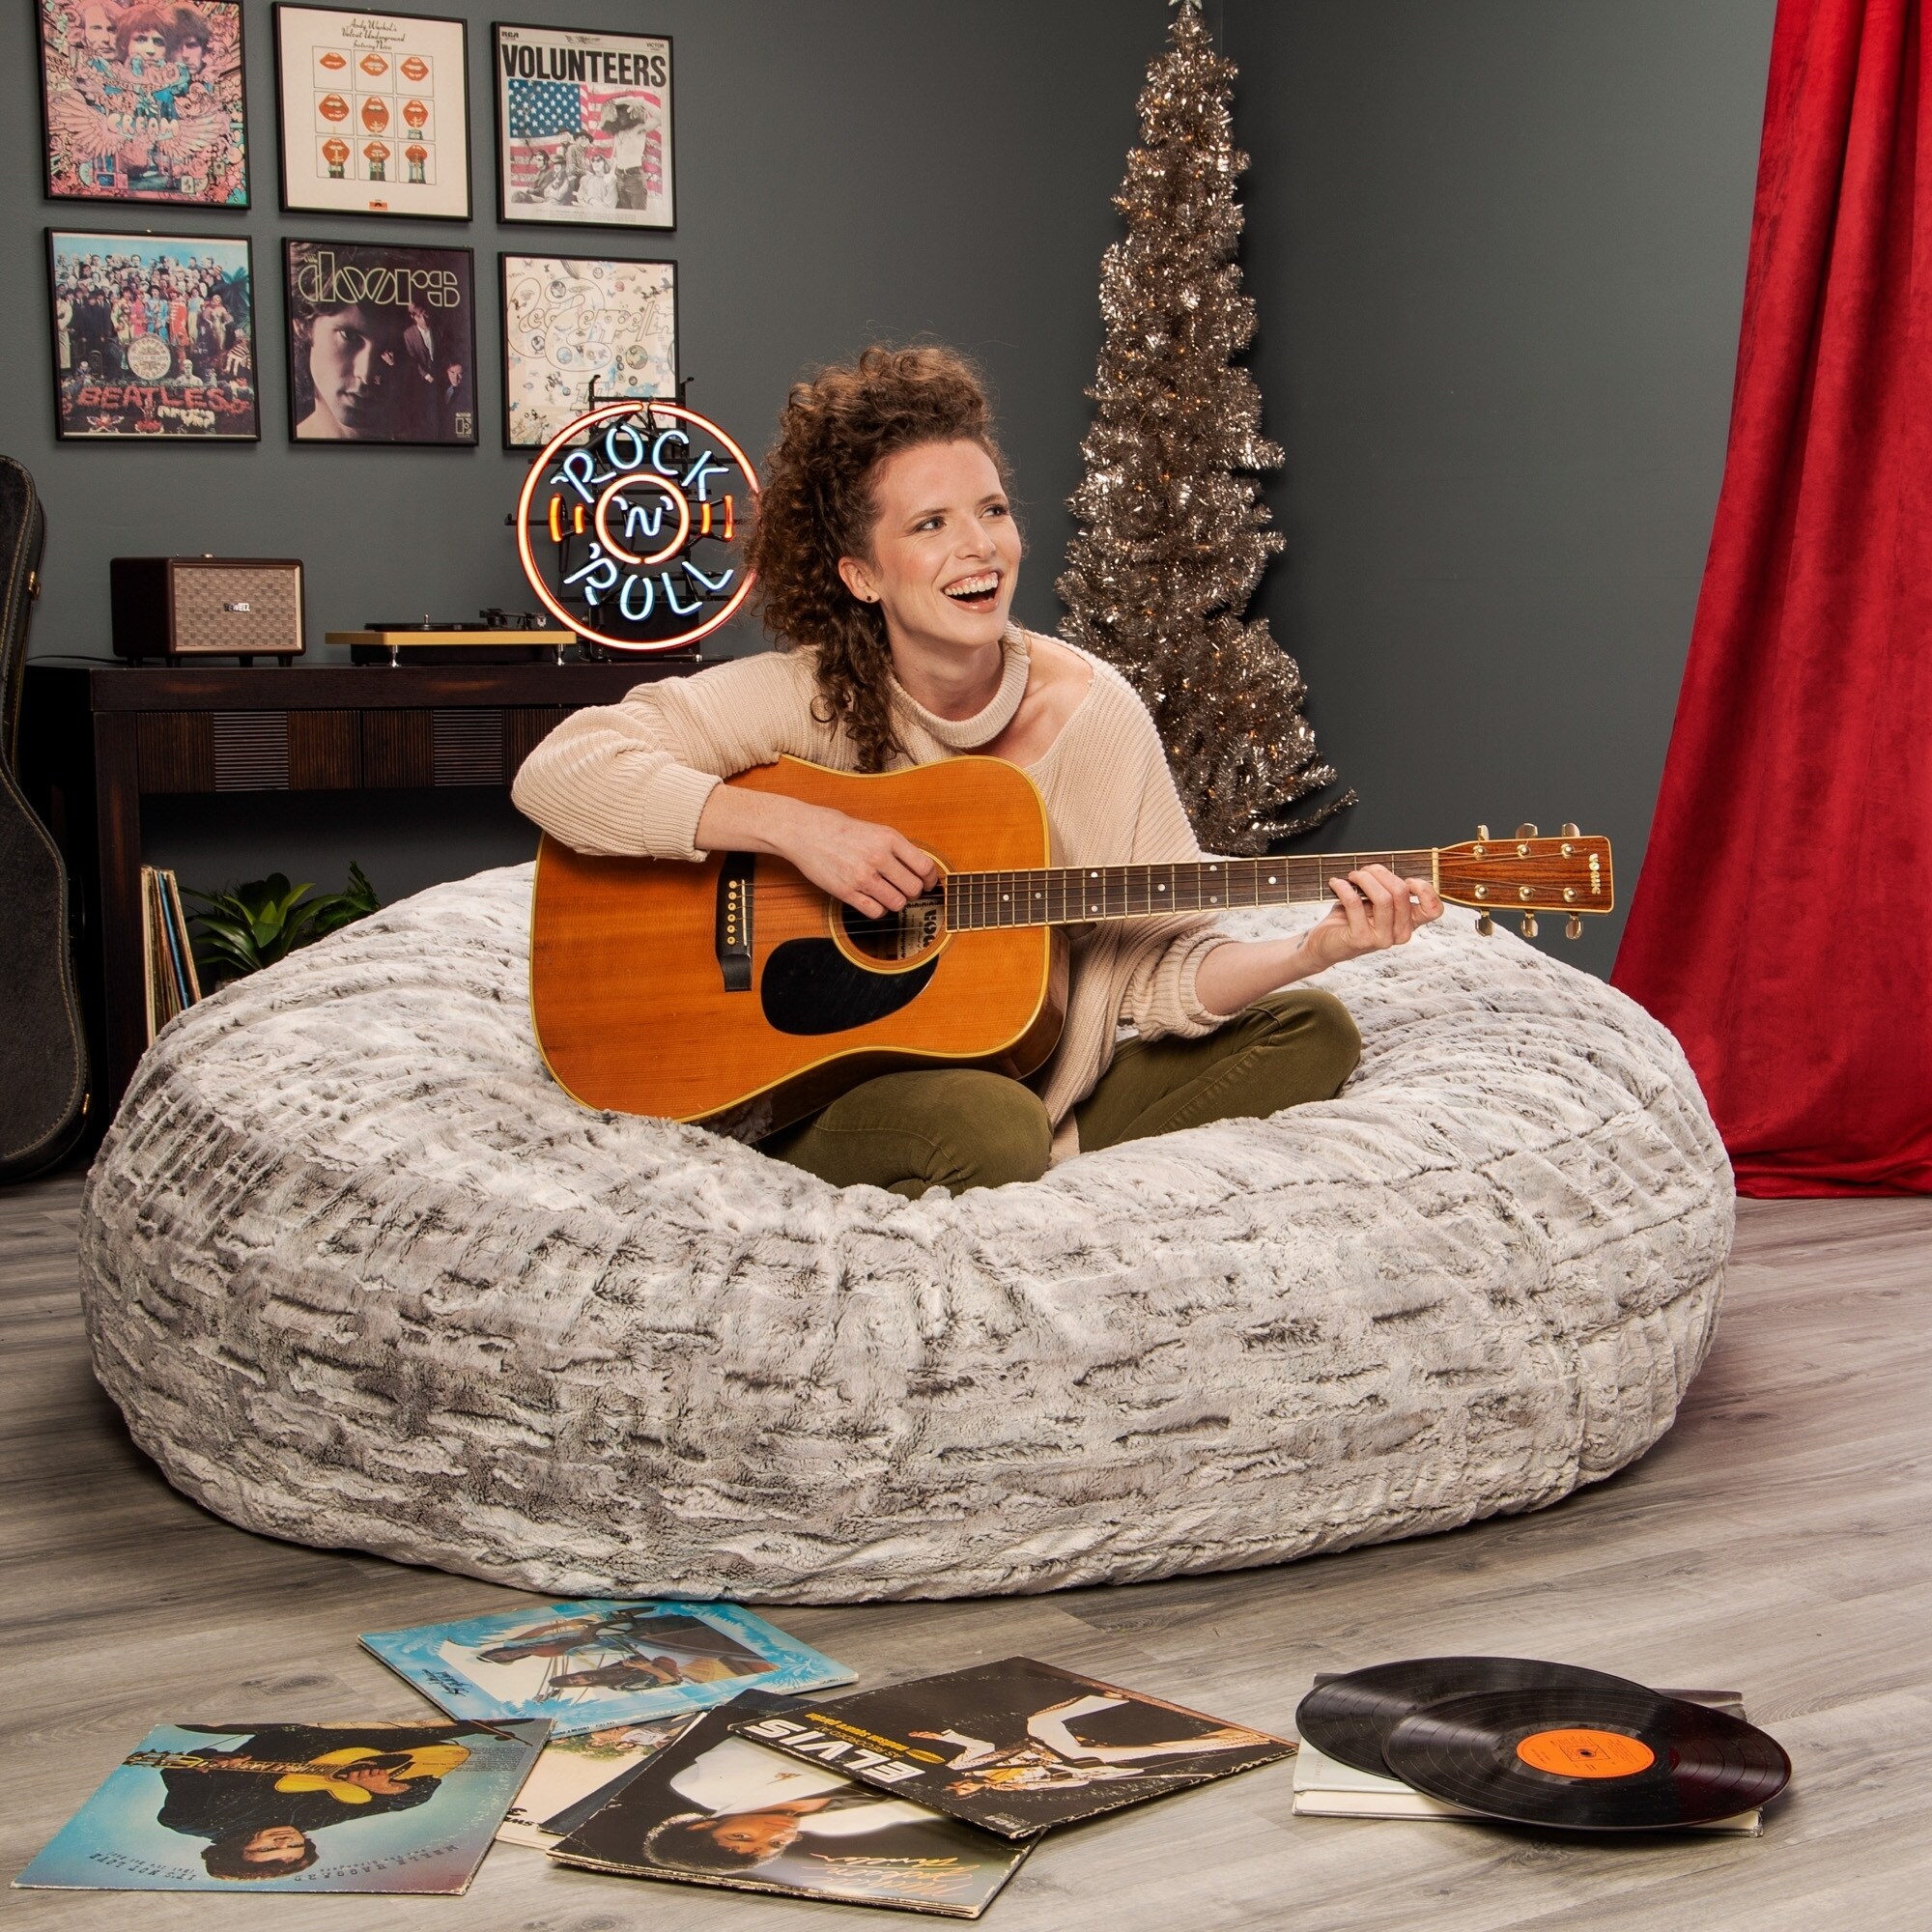 Is Selling Six-Foot, Adult-Size Cocoon Bean Bag Chairs